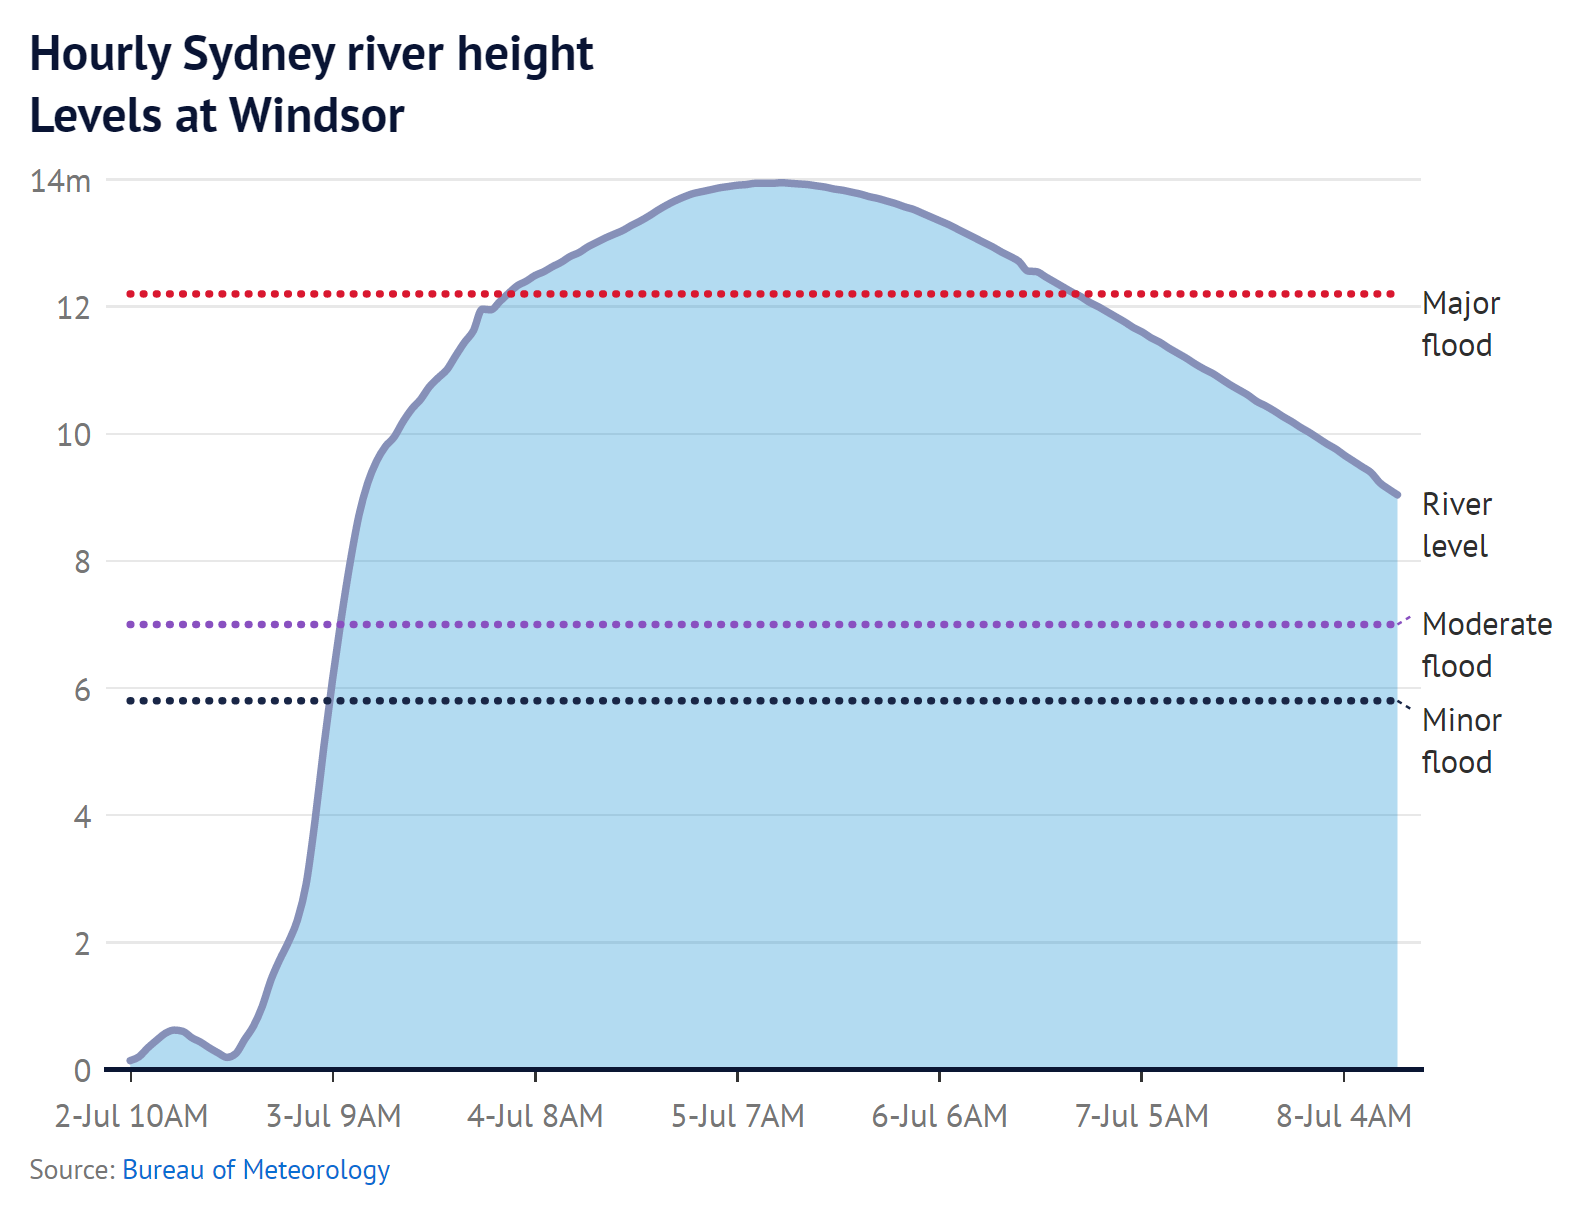 Hourly Hawkesbury River height at Windsor in Sydney, Australia, 2 July 2022 - 8 July 2022. Data: Bureau of Meteorology. Graphic: The Sydney Morning Herald